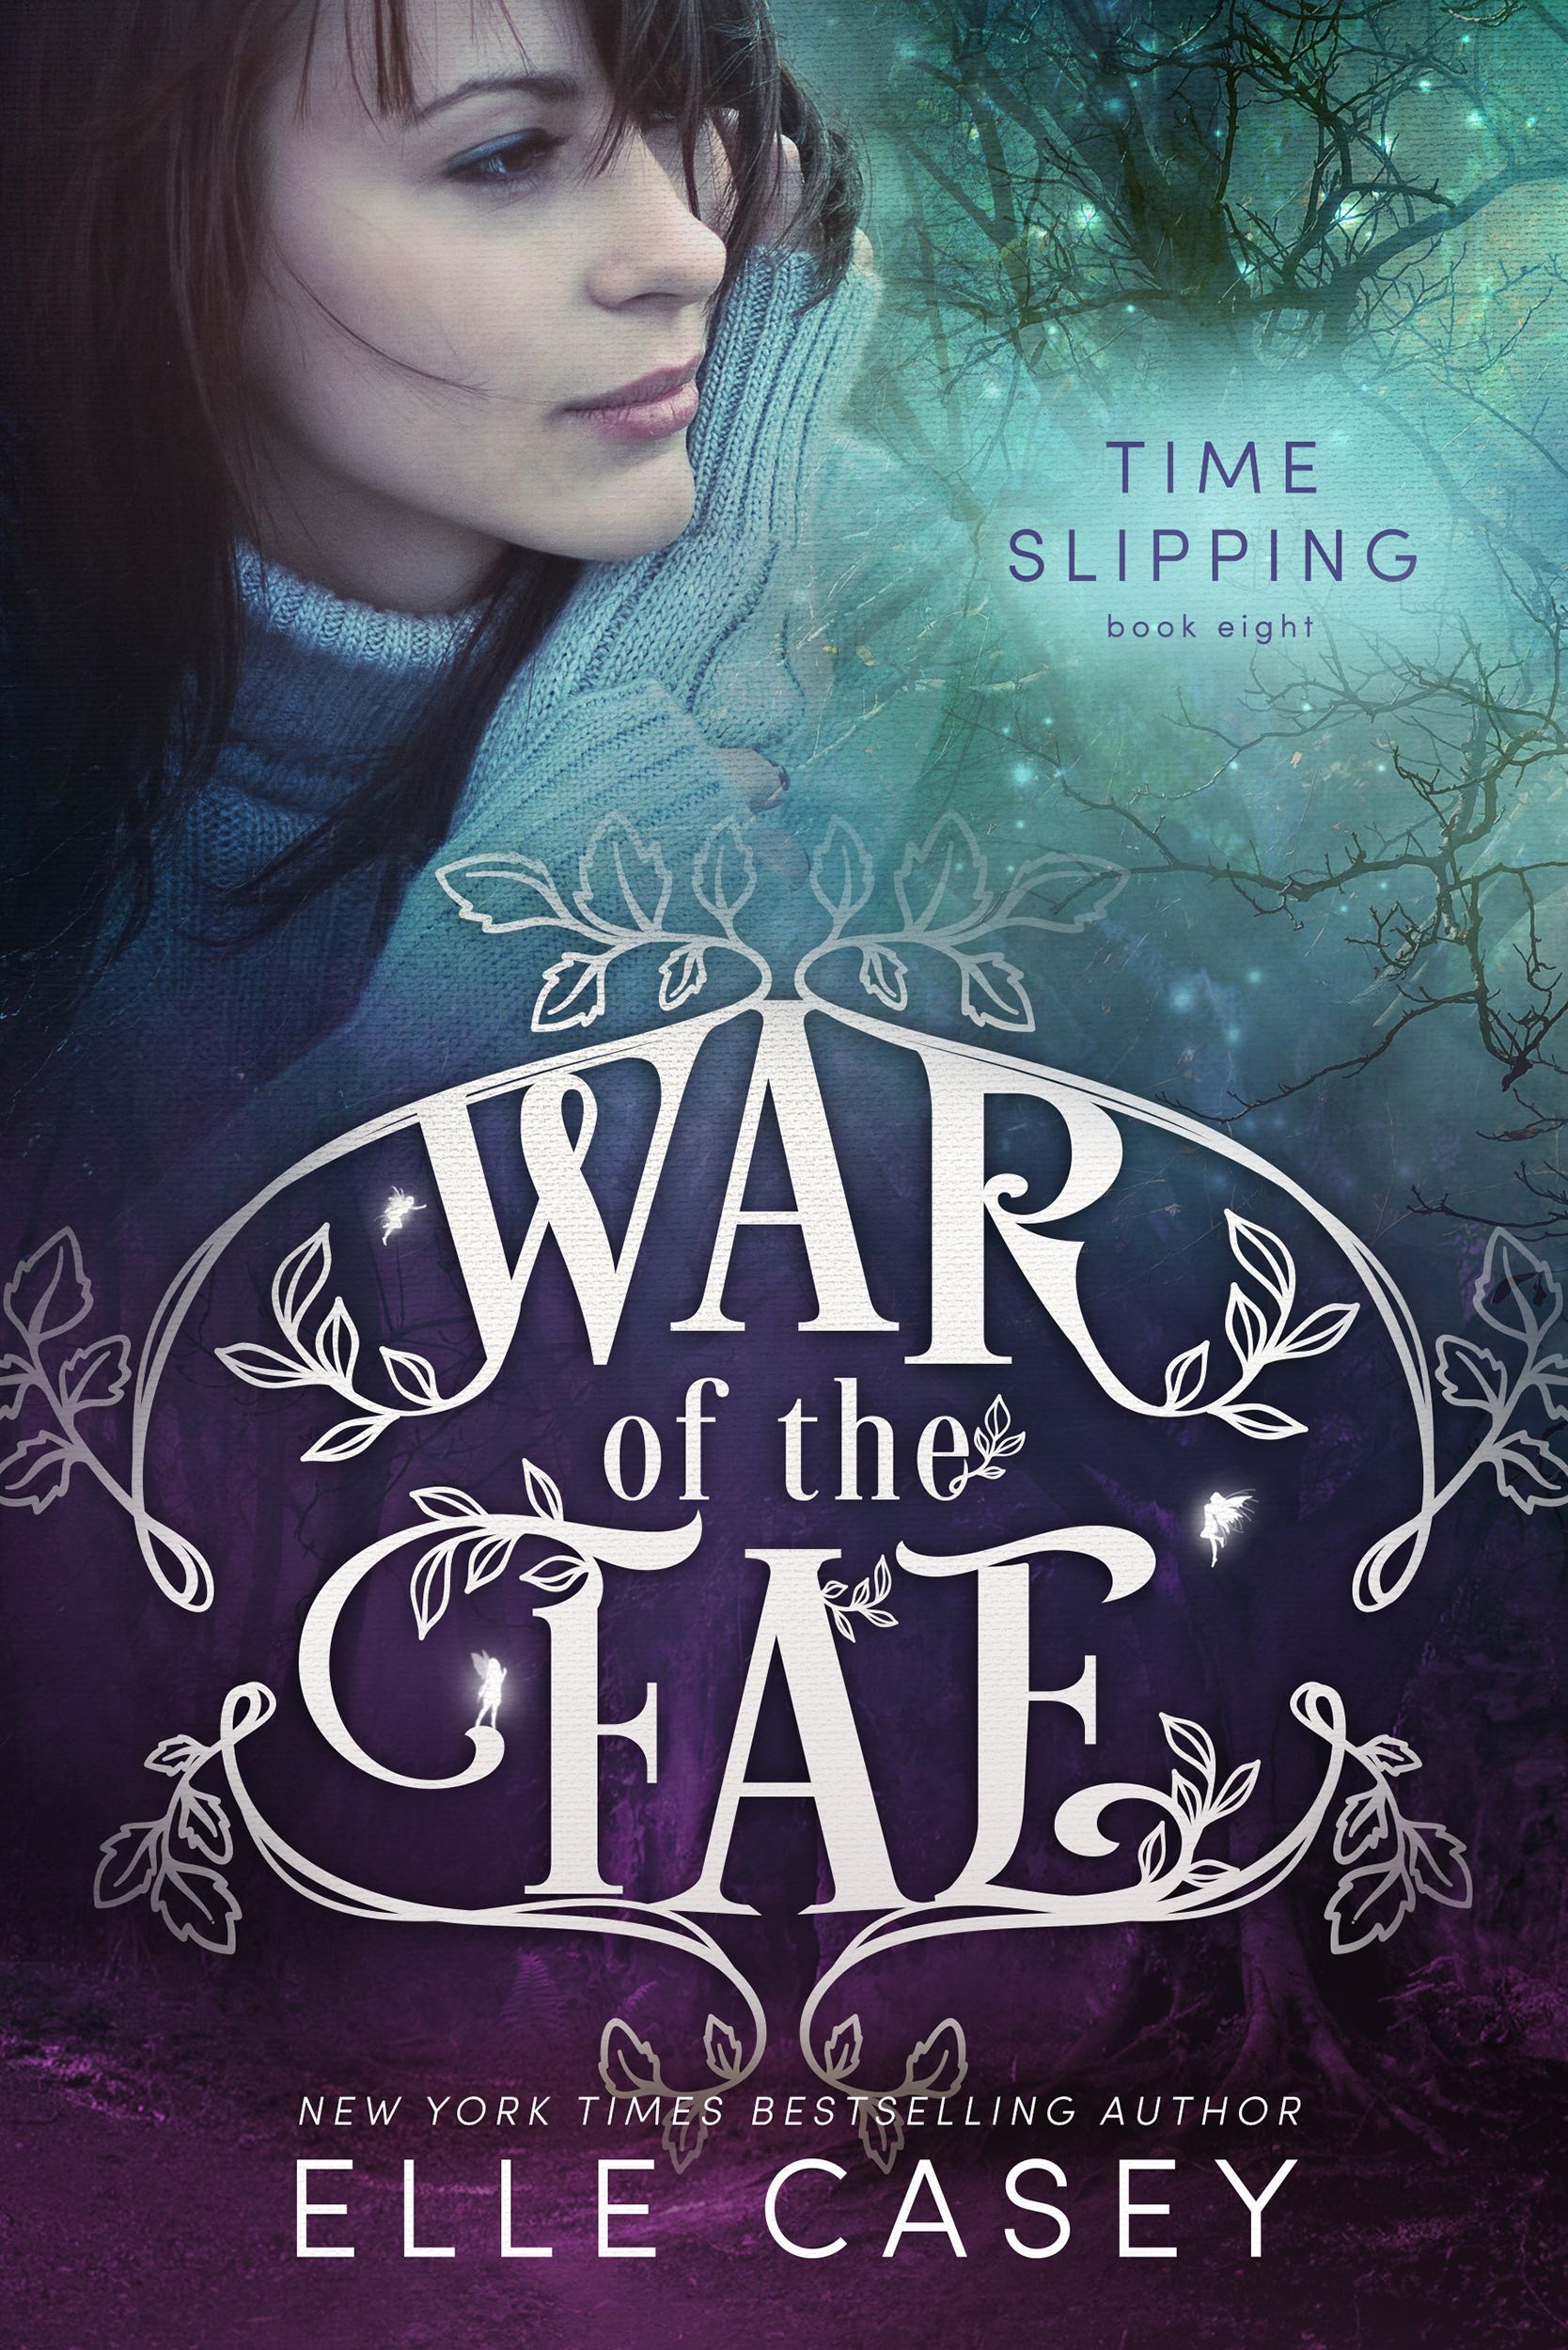 Time Slipping by Elle Casey